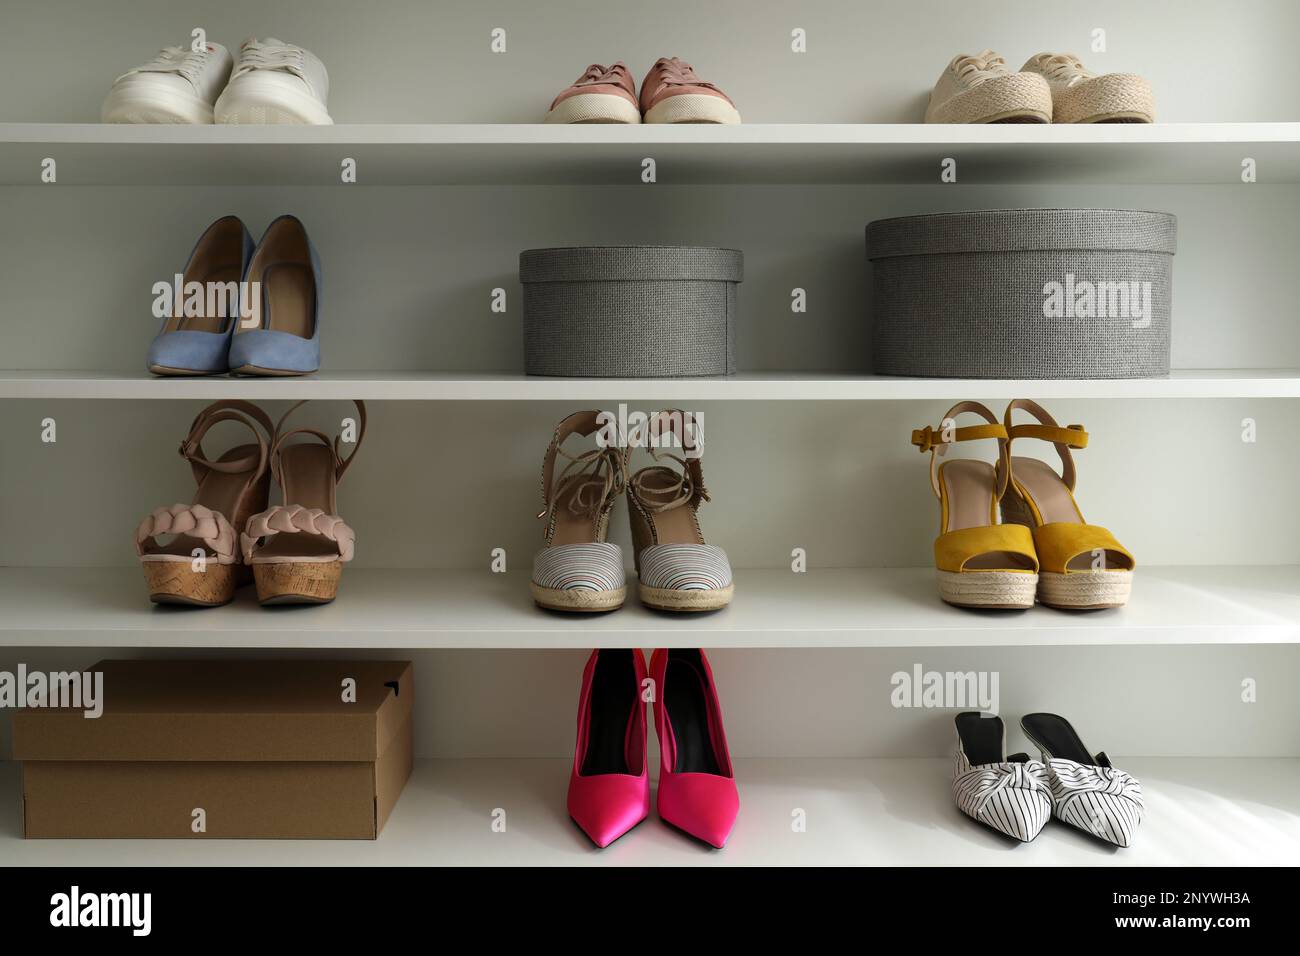 Ask Away Blog: 4 Ways To Organize & Store Shoes